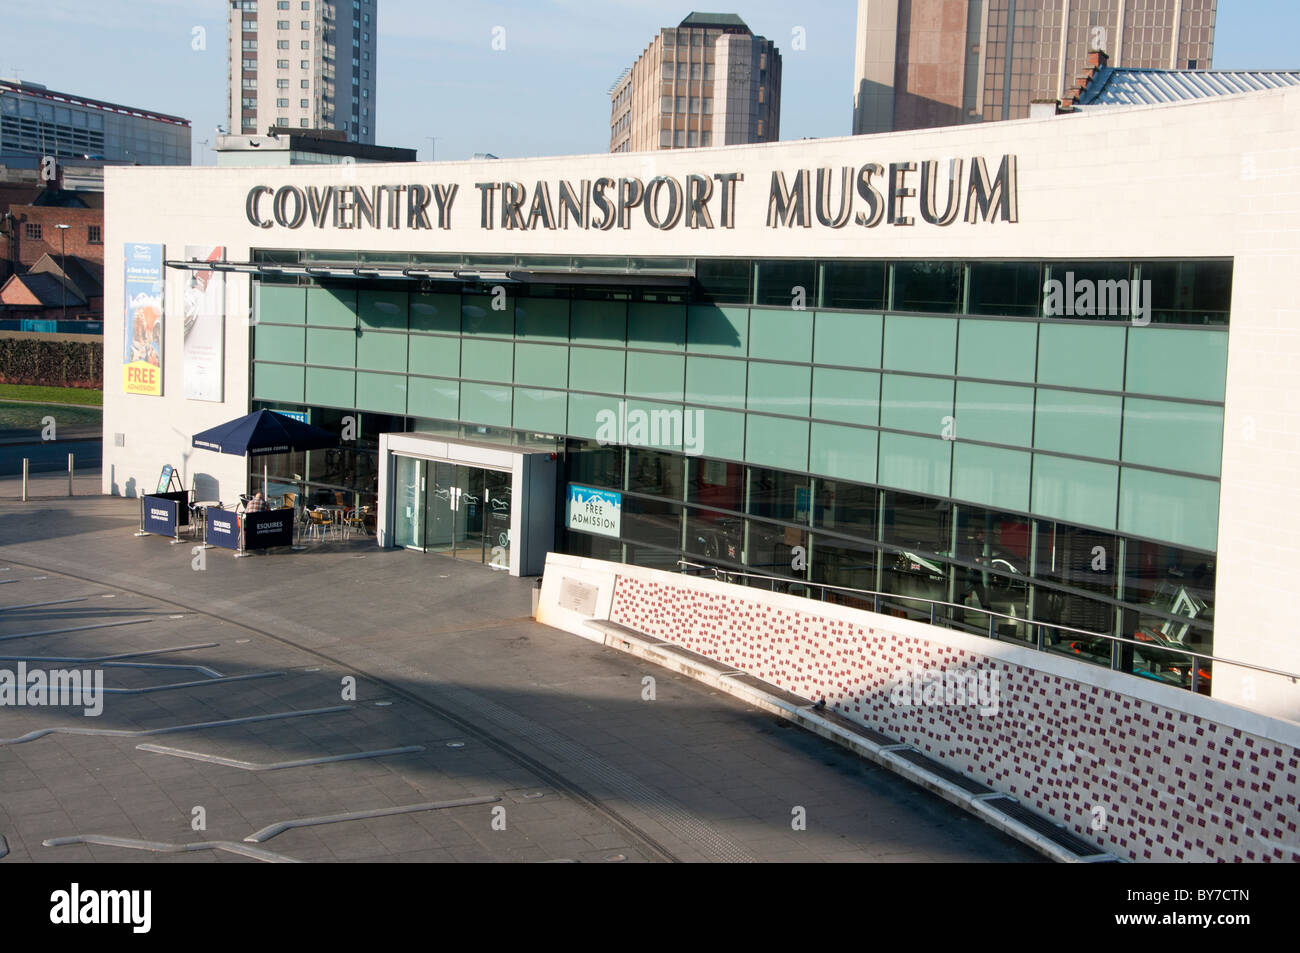 Coventry Transport Museum, Coventry, West Midlands, England. Stock Photo